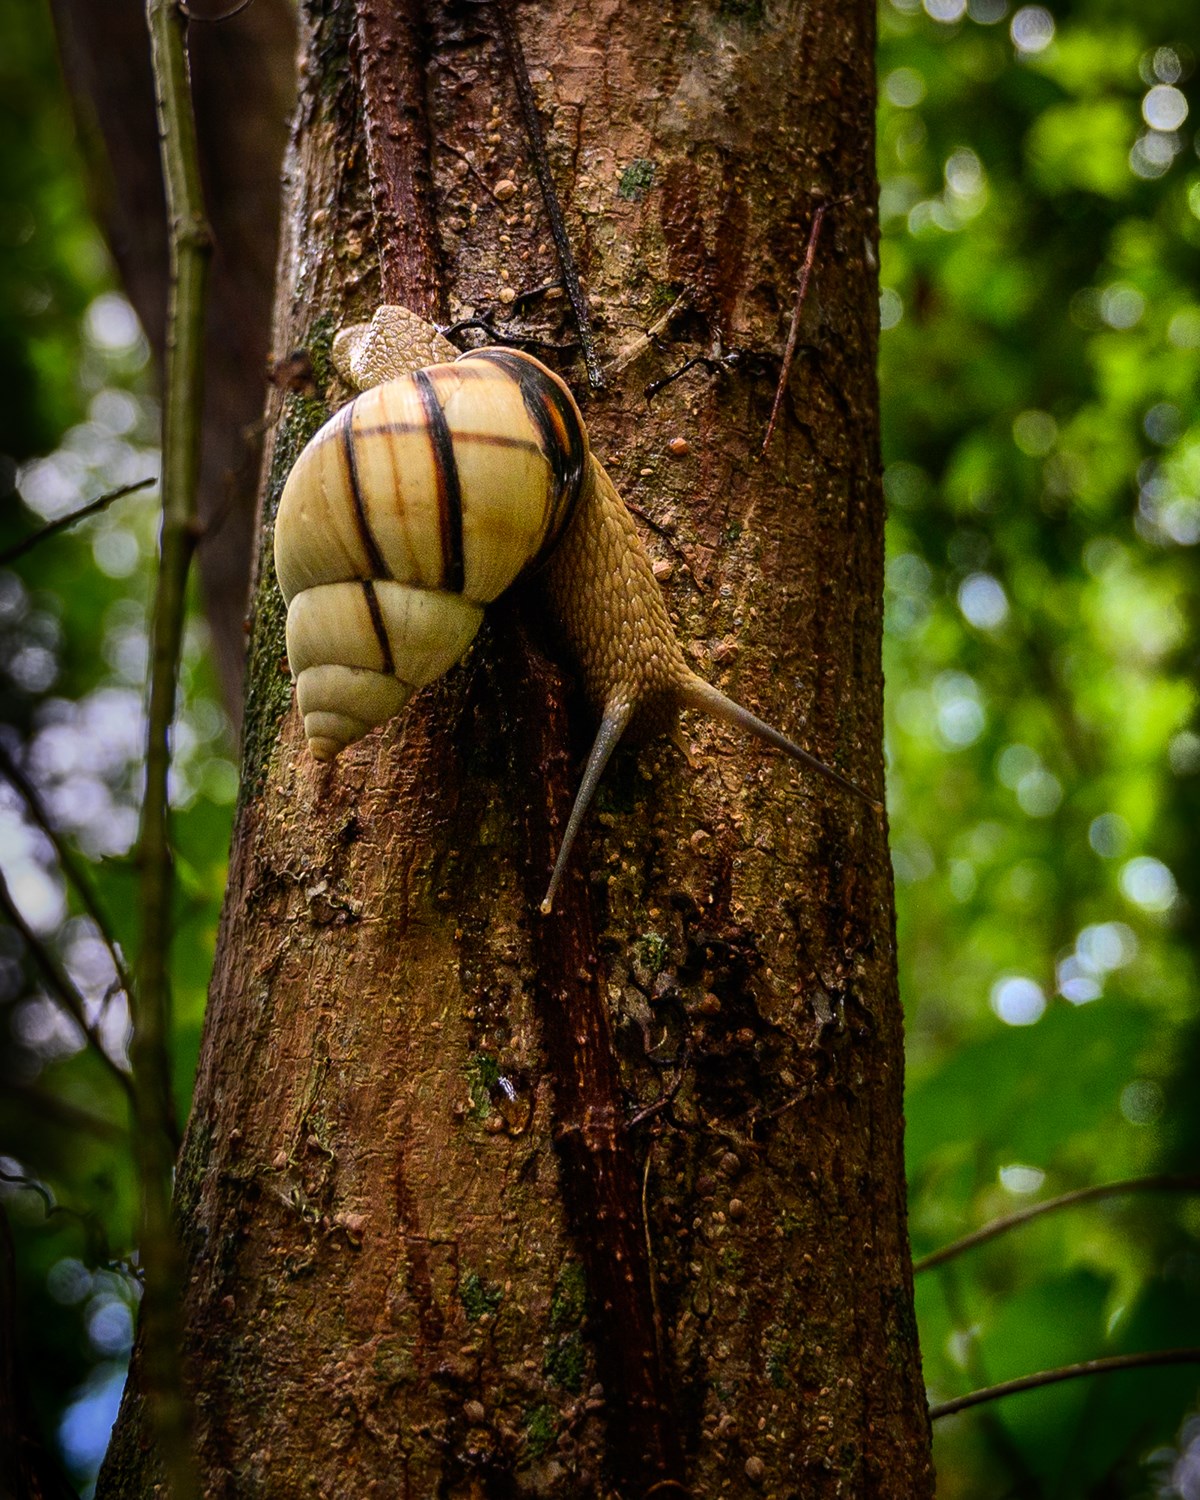 A light yellow snail with a cream-colored shell with black streaks crawls on a tree trunk.